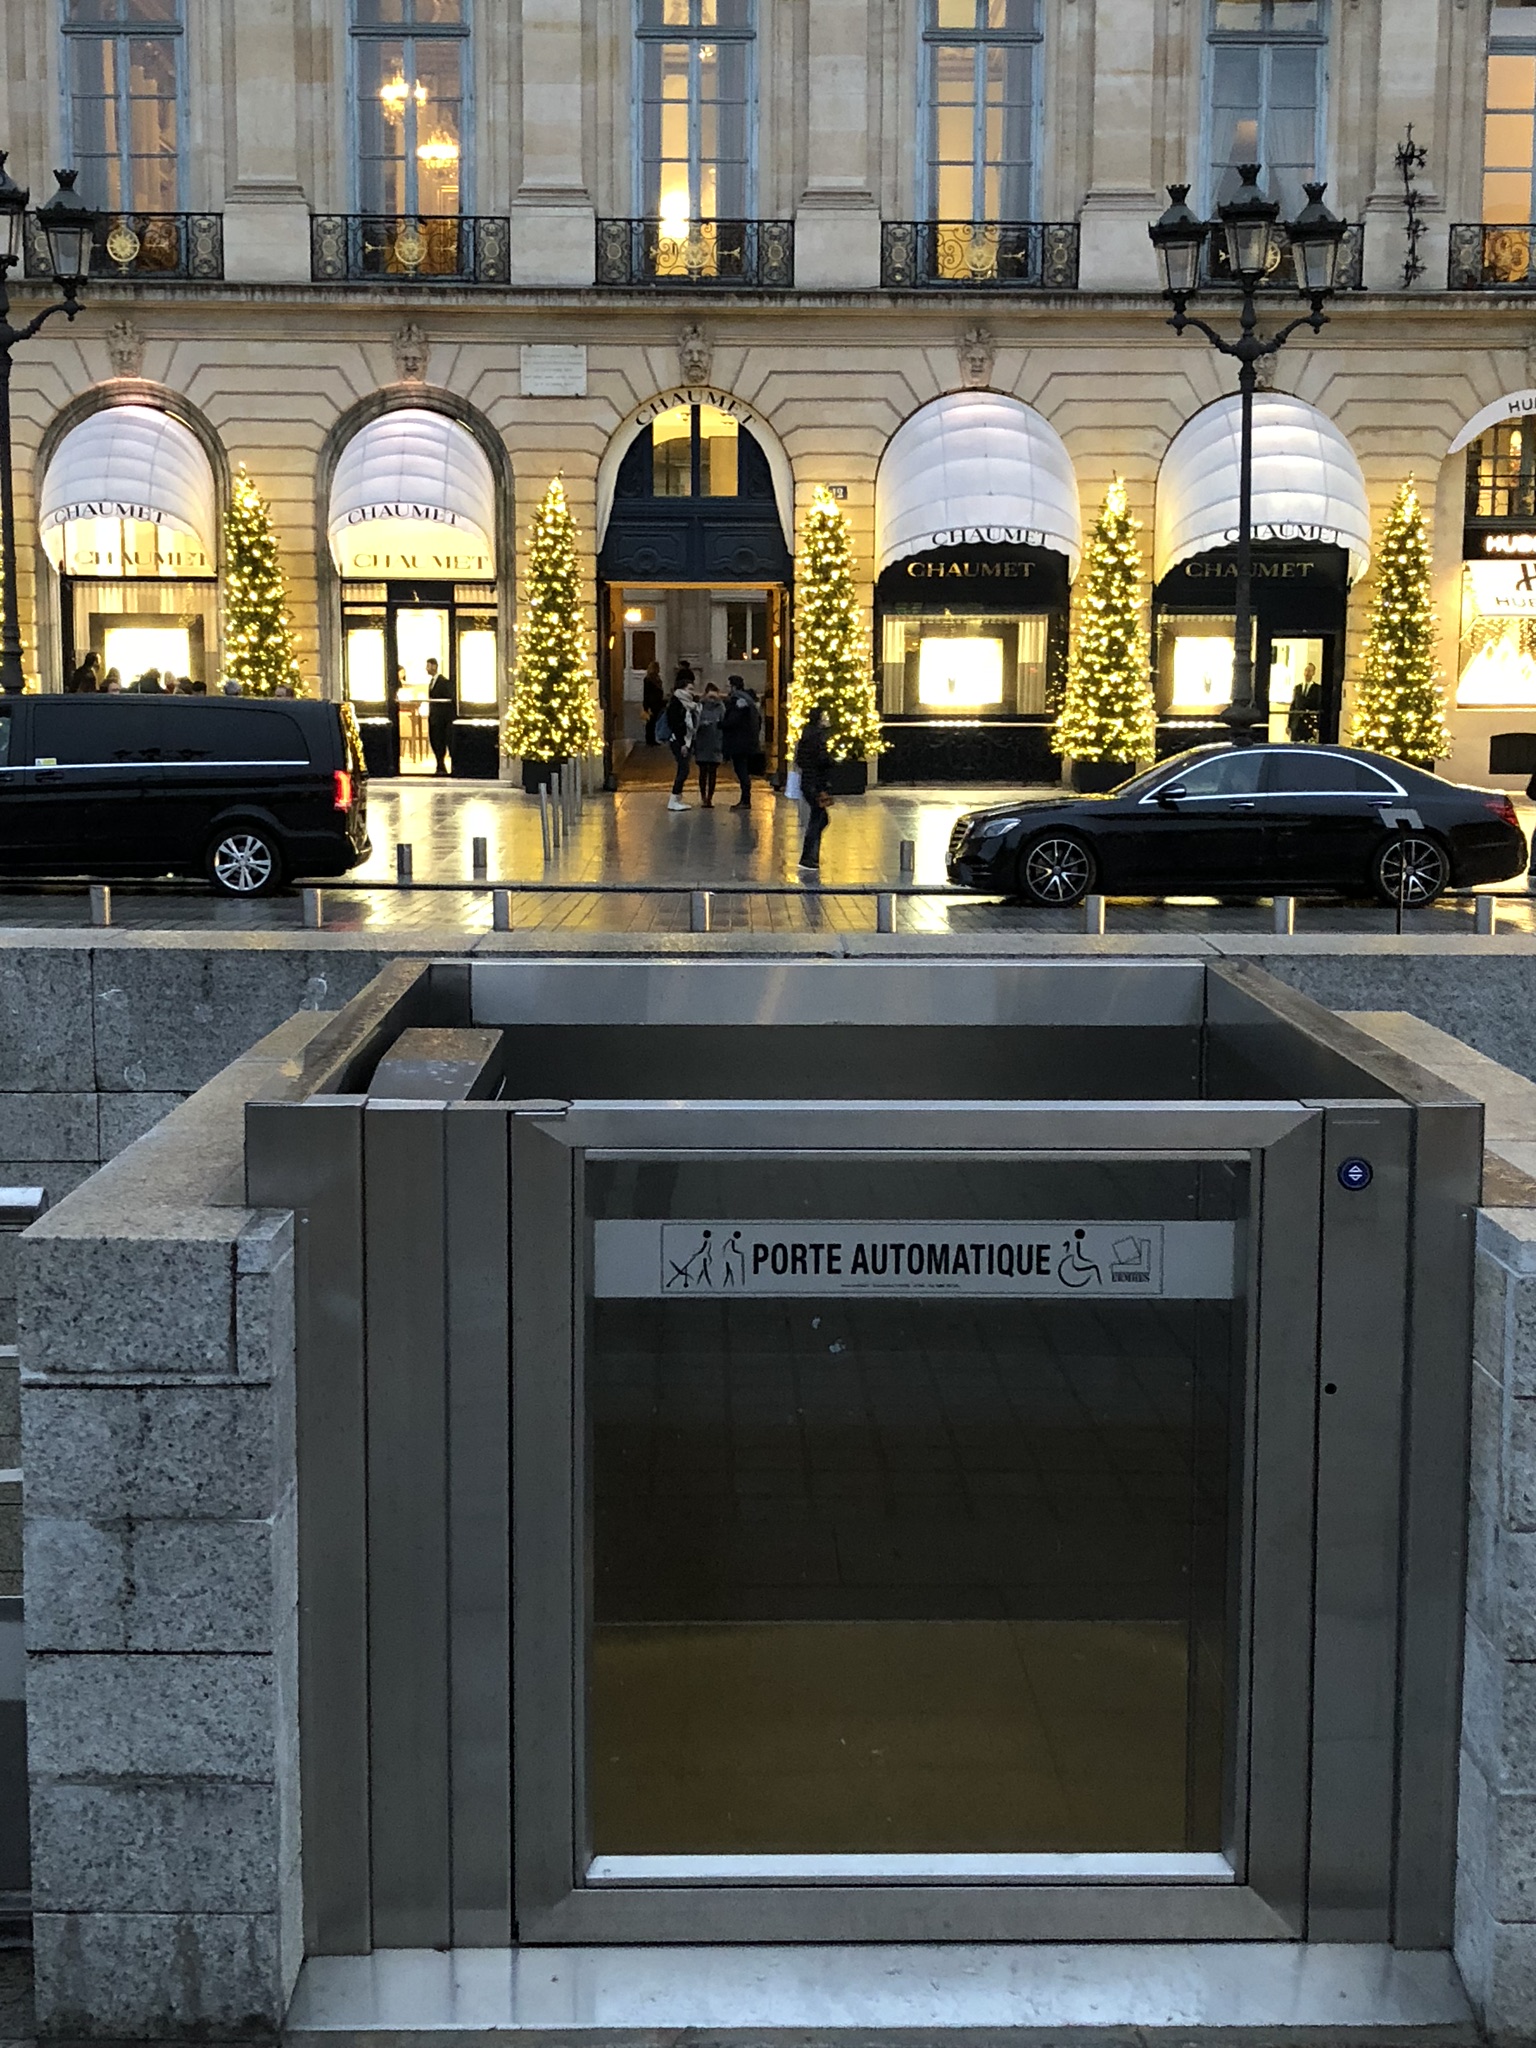 Chanel and Mauboussin Shops in Place Vendome Square in Paris